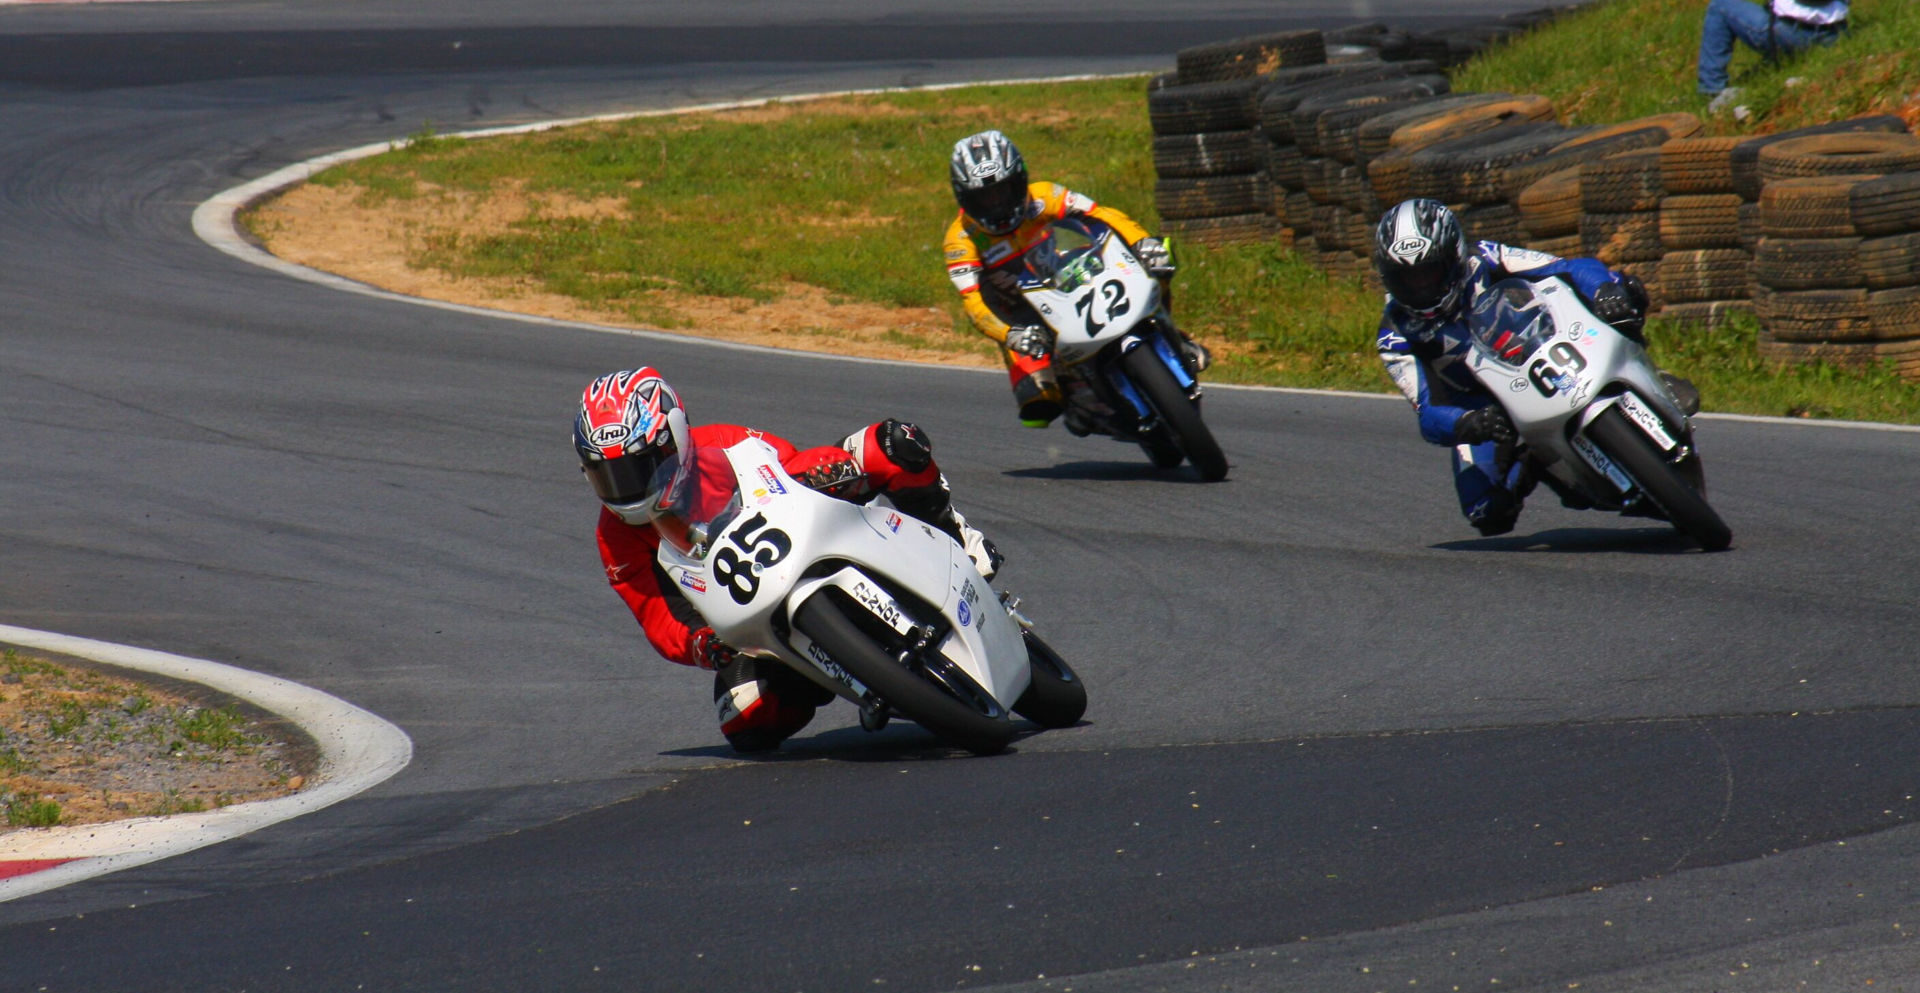 Jake Lewis (85), Hayden Gillim (69), and Miles Thornton (72) during a USGPRU Moriwaki Challenge Cup Powered by Honda race at Summit Point Raceway in 2008. Photo by etechphoto.com.